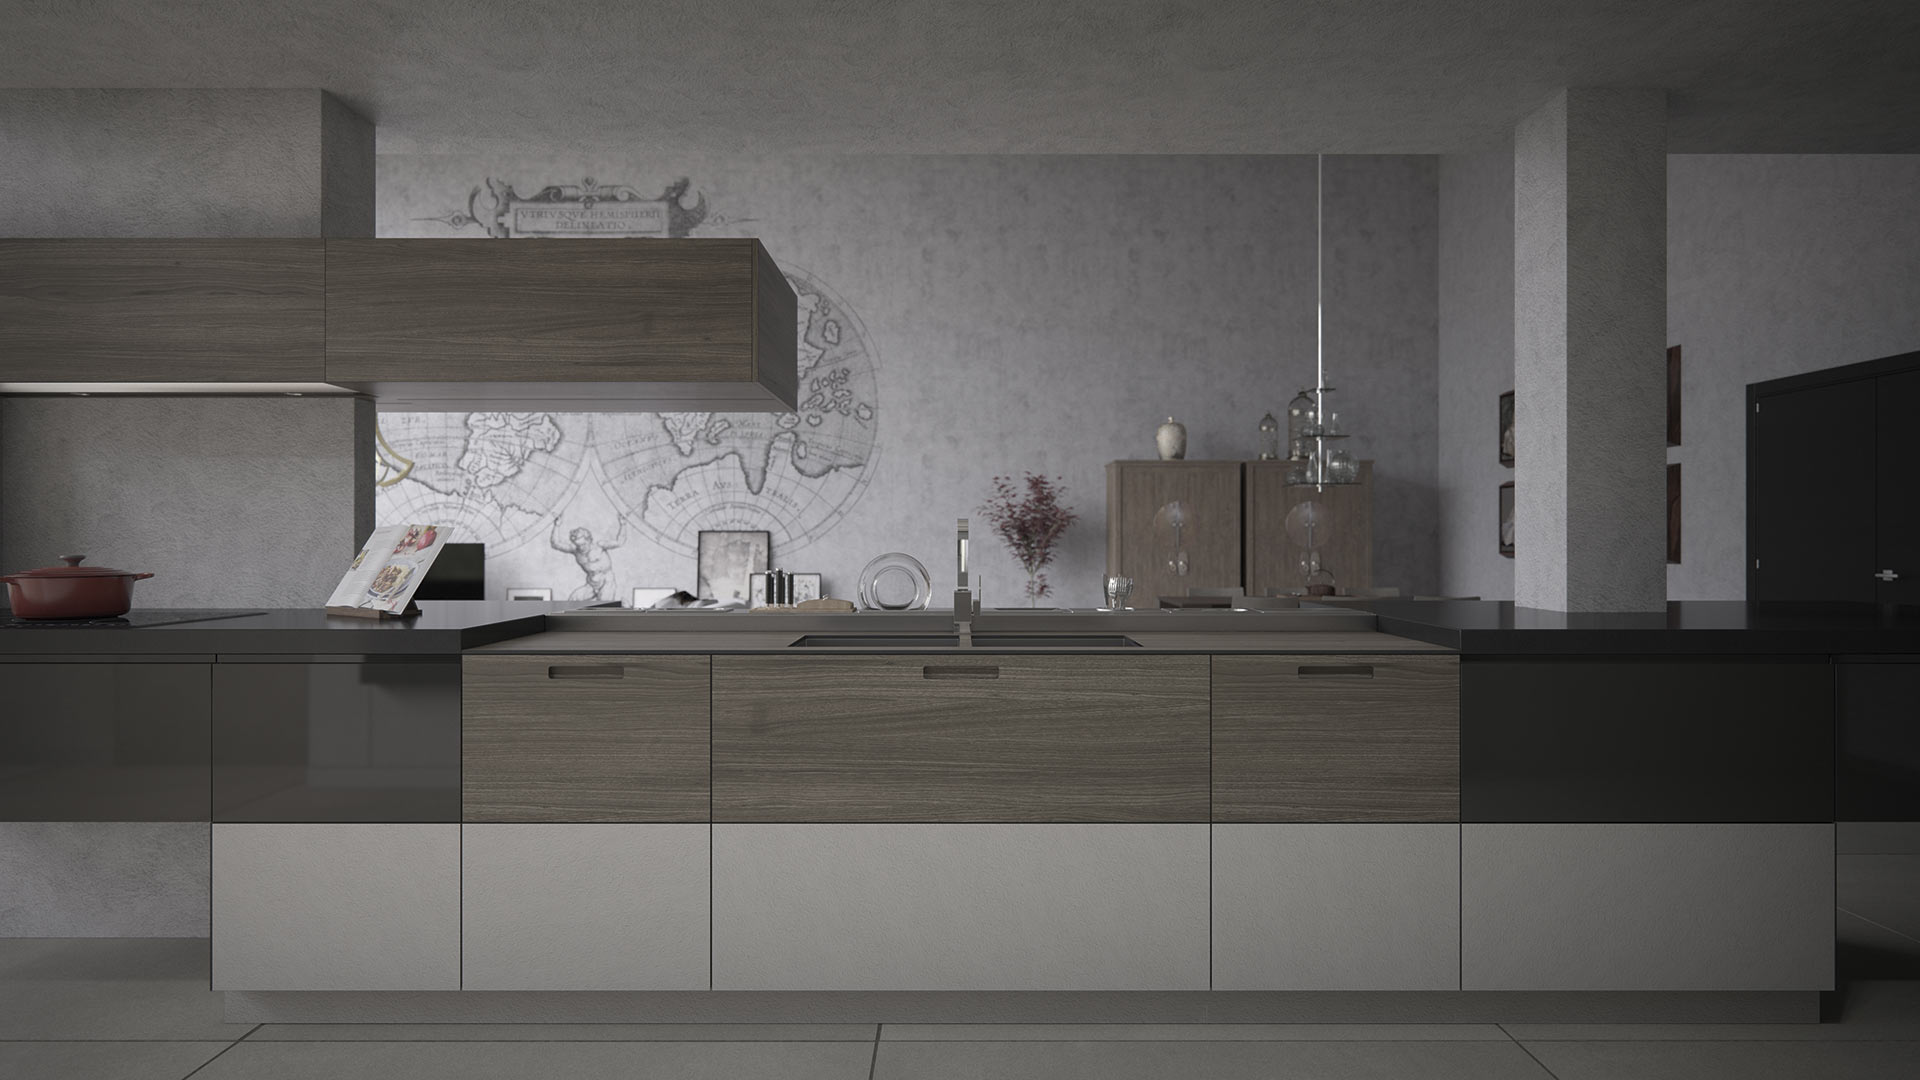 Originality with lines and combination of different materials to create a unique kitchen